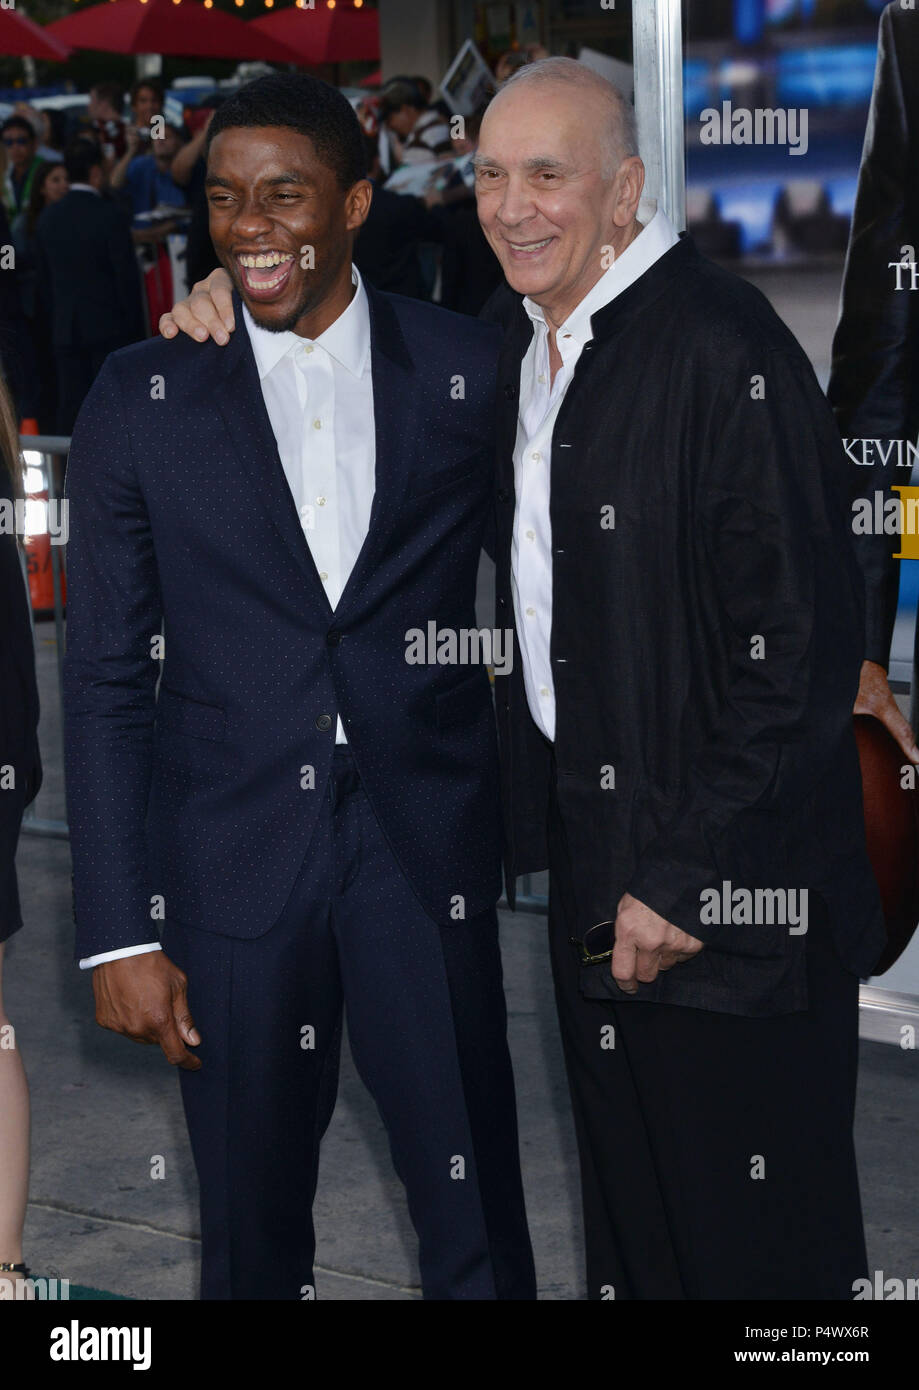 Frank Langella And Chadwick Boseman At The Draft Day Premiere At The Westwood Village Theatre In Los Angelesfrank Langella And Chadwick Boseman 130 Event In Hollywood Life - California Red Carpet Event